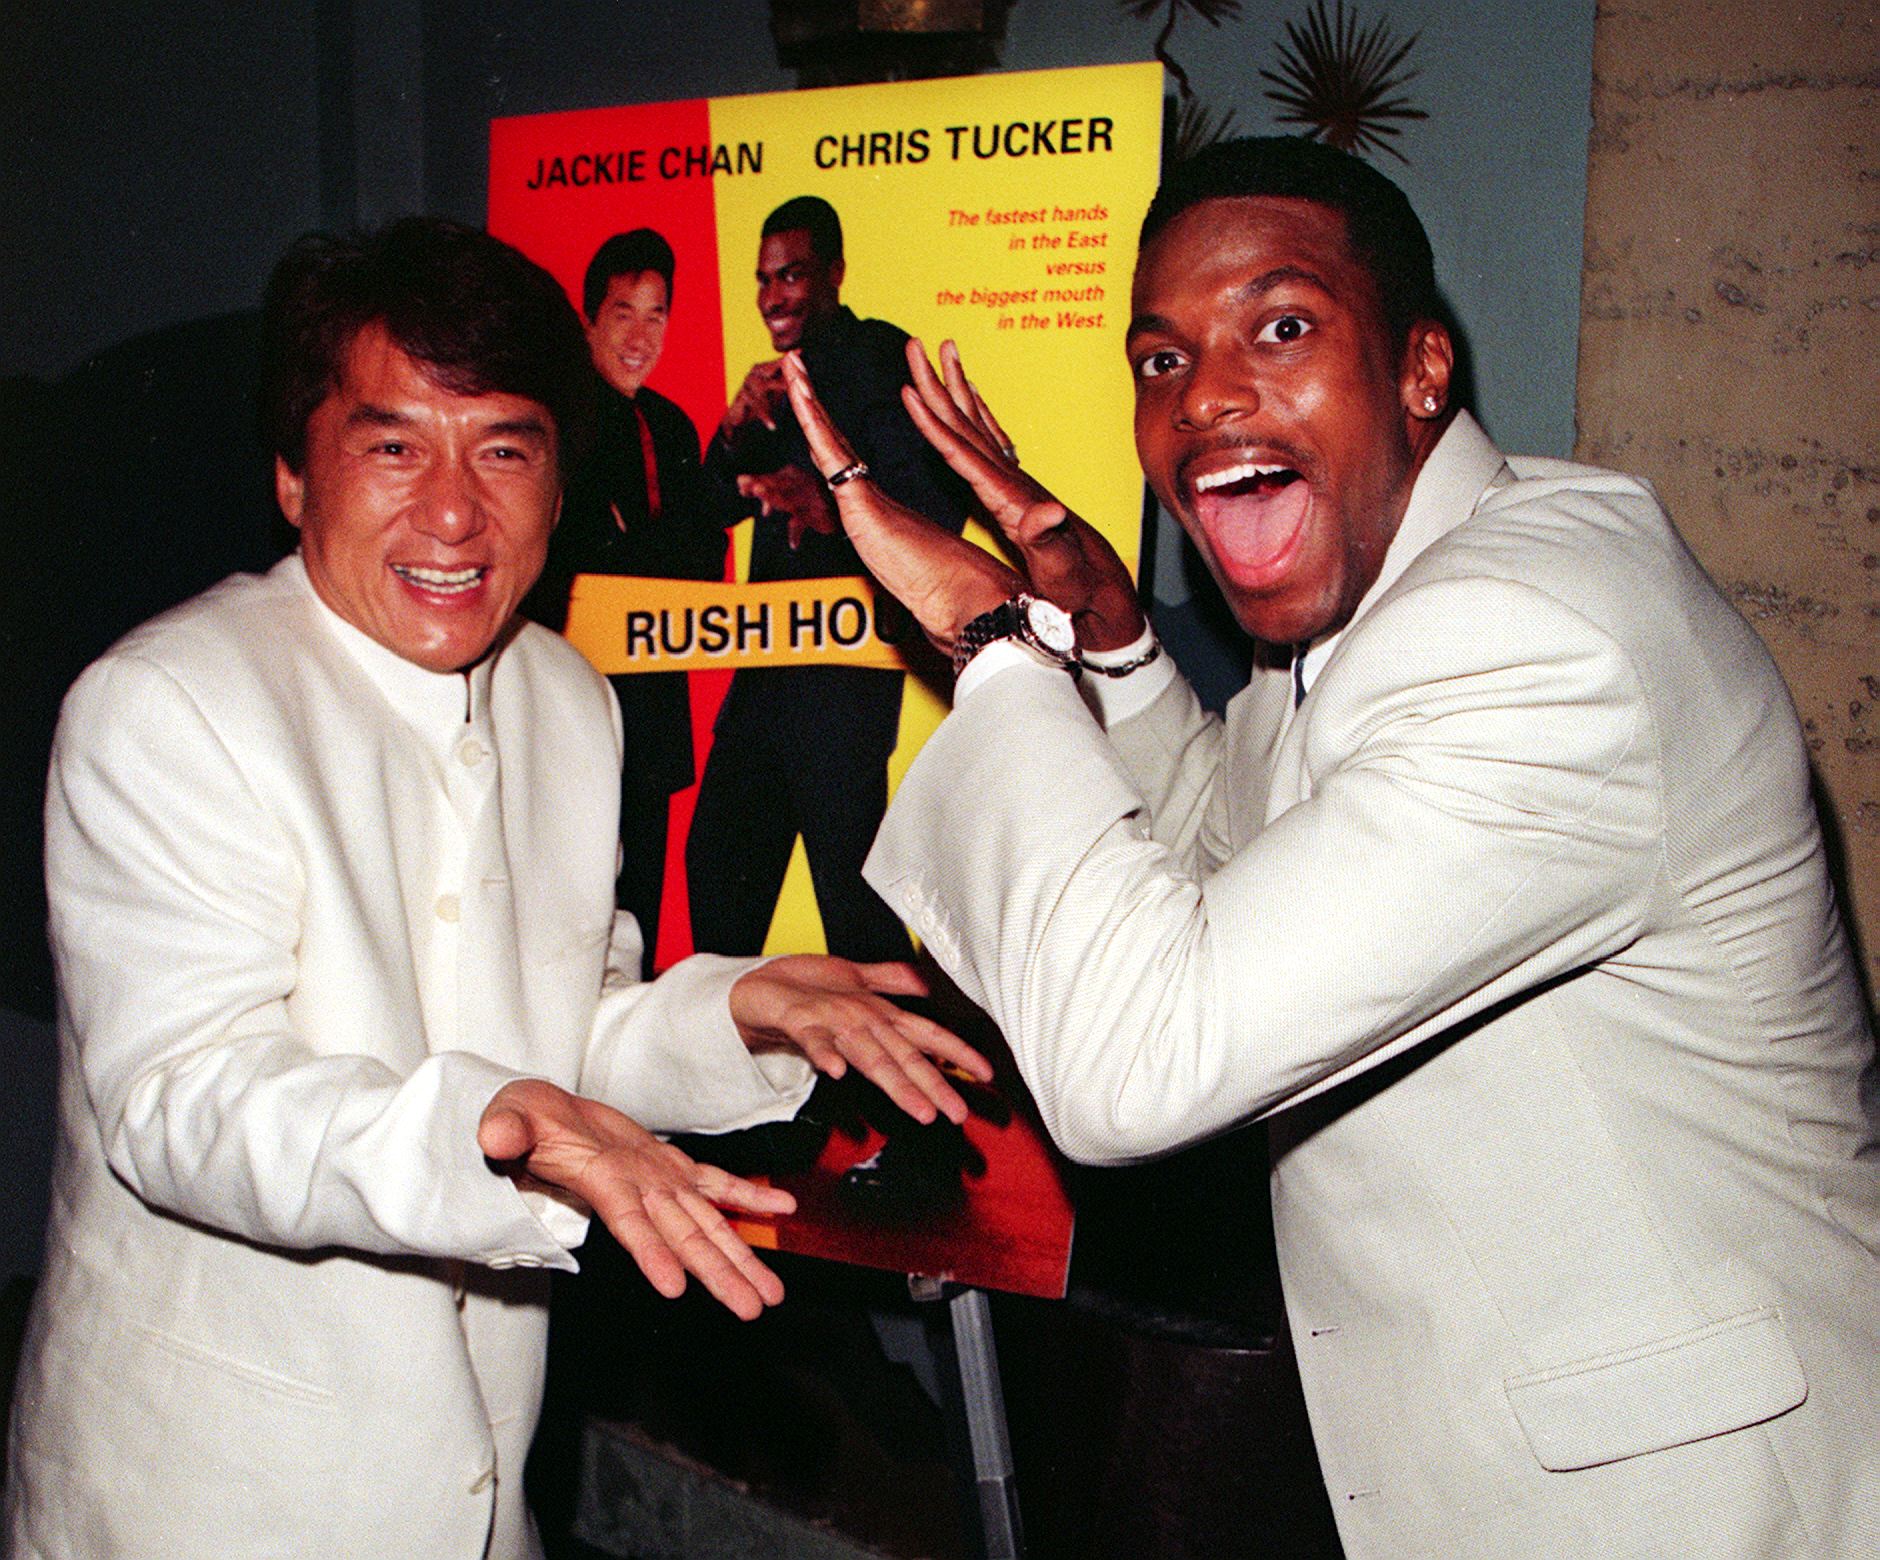 The Funniest Movies of All Time Include Black Classics Like ‘Sister Act,’ ‘Rush Hour’ and 'Girls Trip'